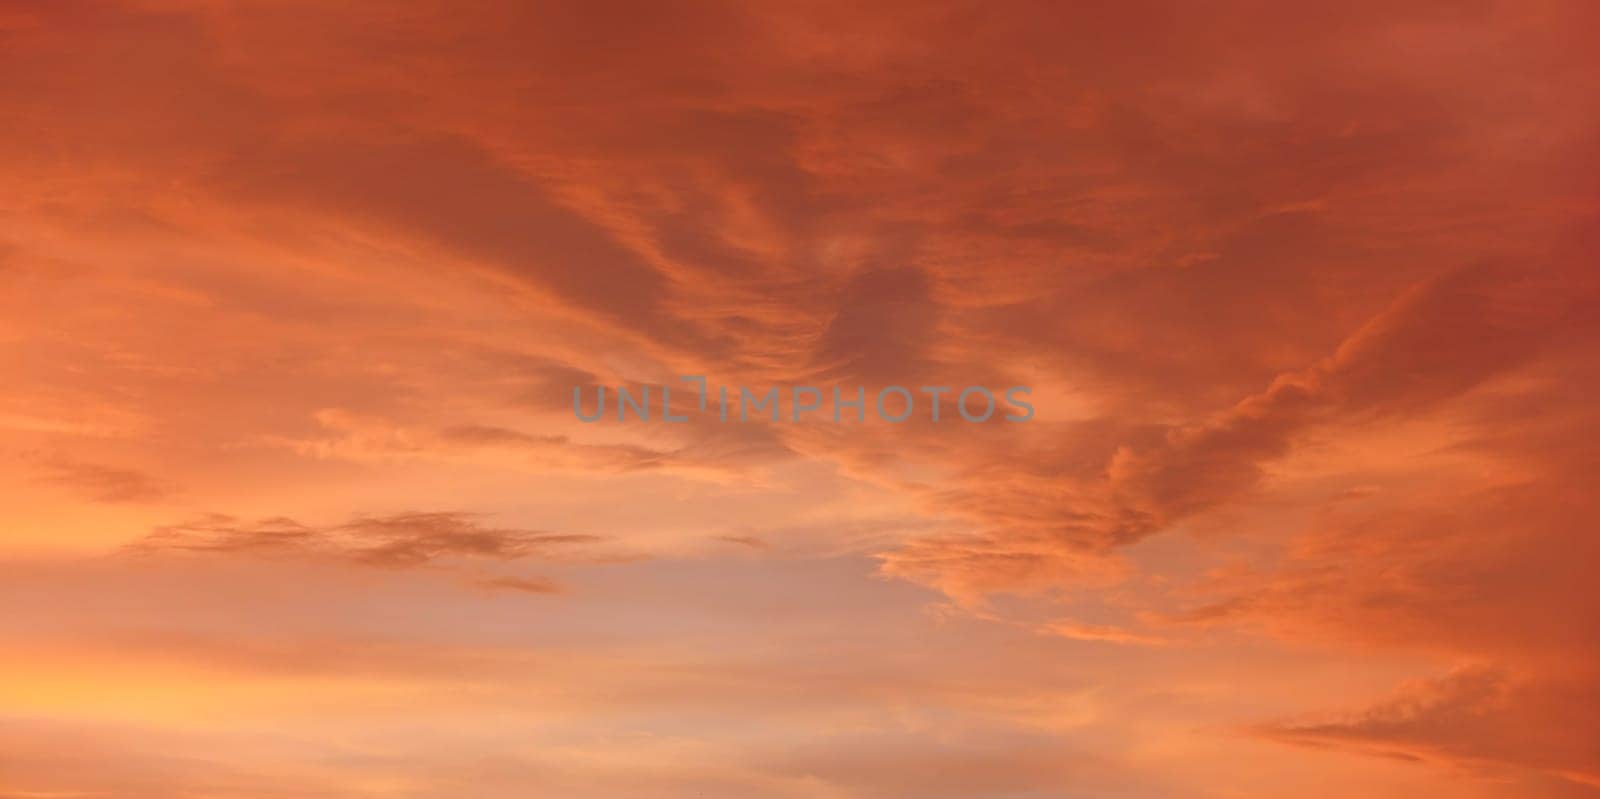 Orange and pink sky after sunset, nice clouds background by Ivanko